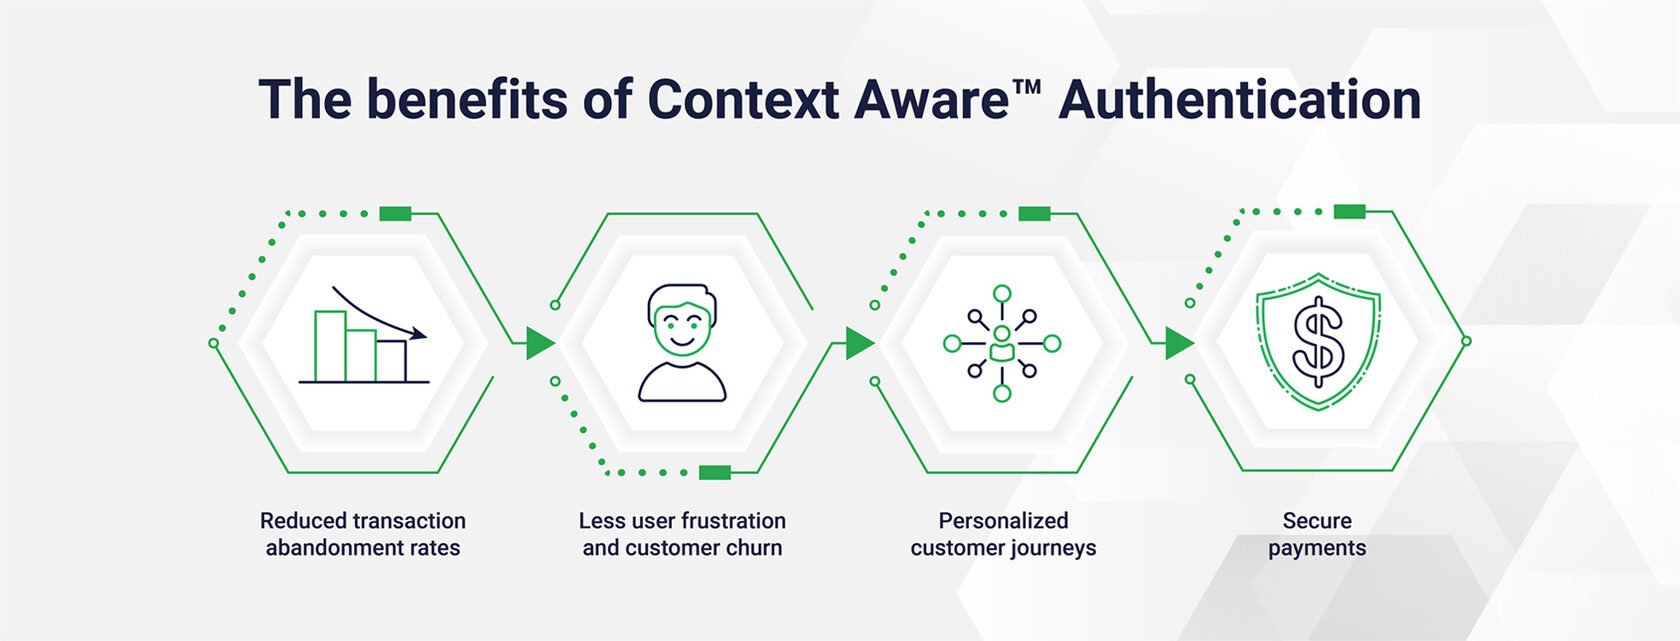 The benefits of Context Aware™ Authentication